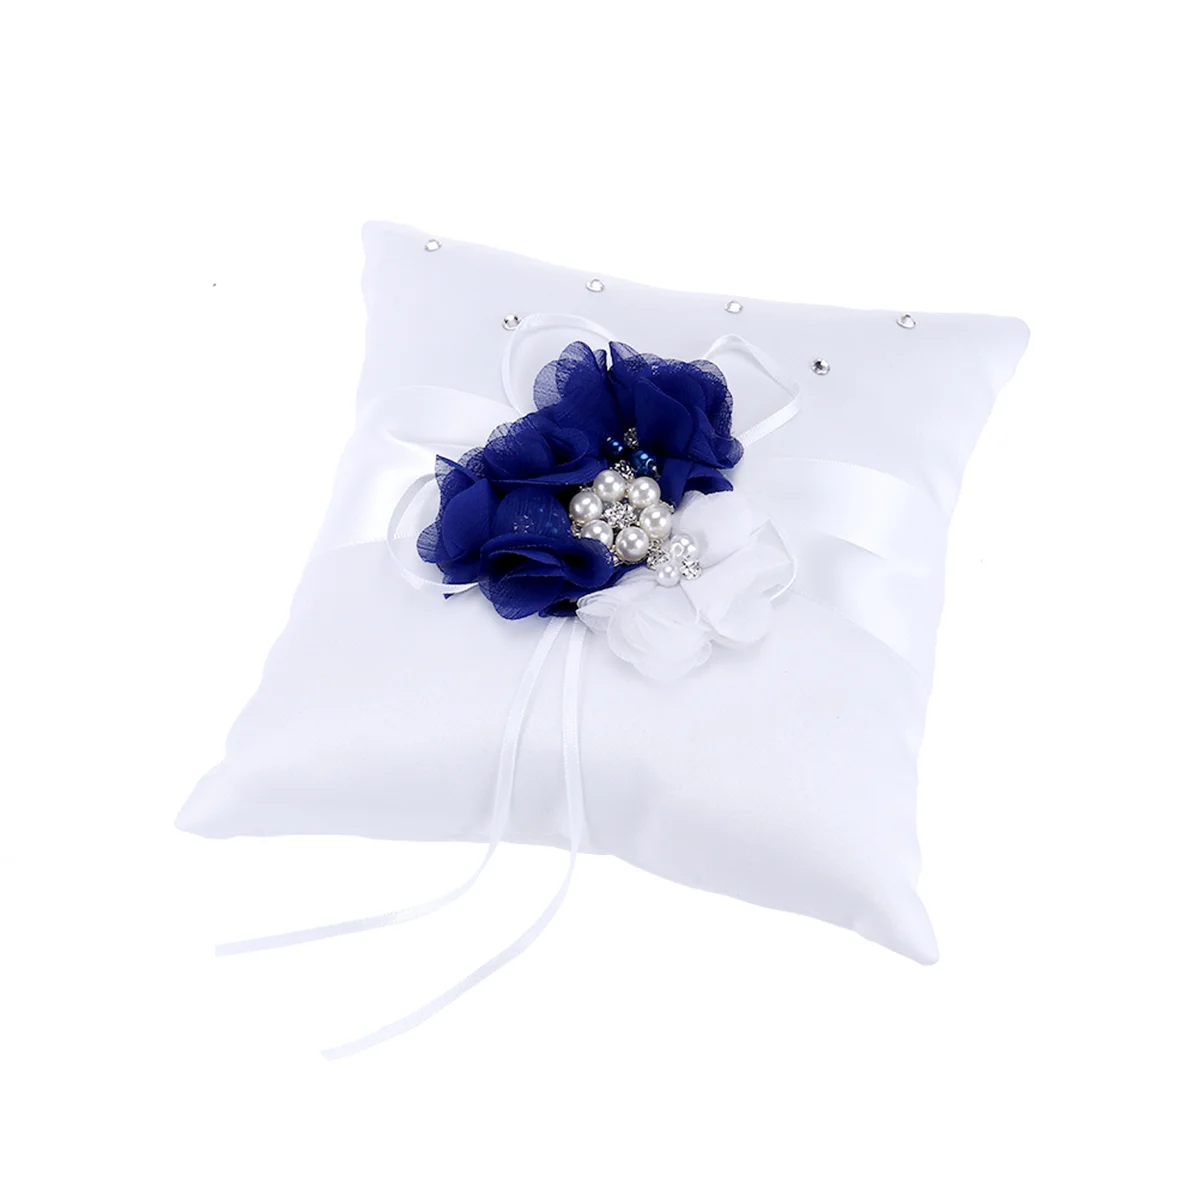 

Ring Pillow Wedding Bearer Pillows Box Ceremony Cushion Pearl Holder Flower Ribbon Bow Gifts Barrier Sign Gift Groom Decorations